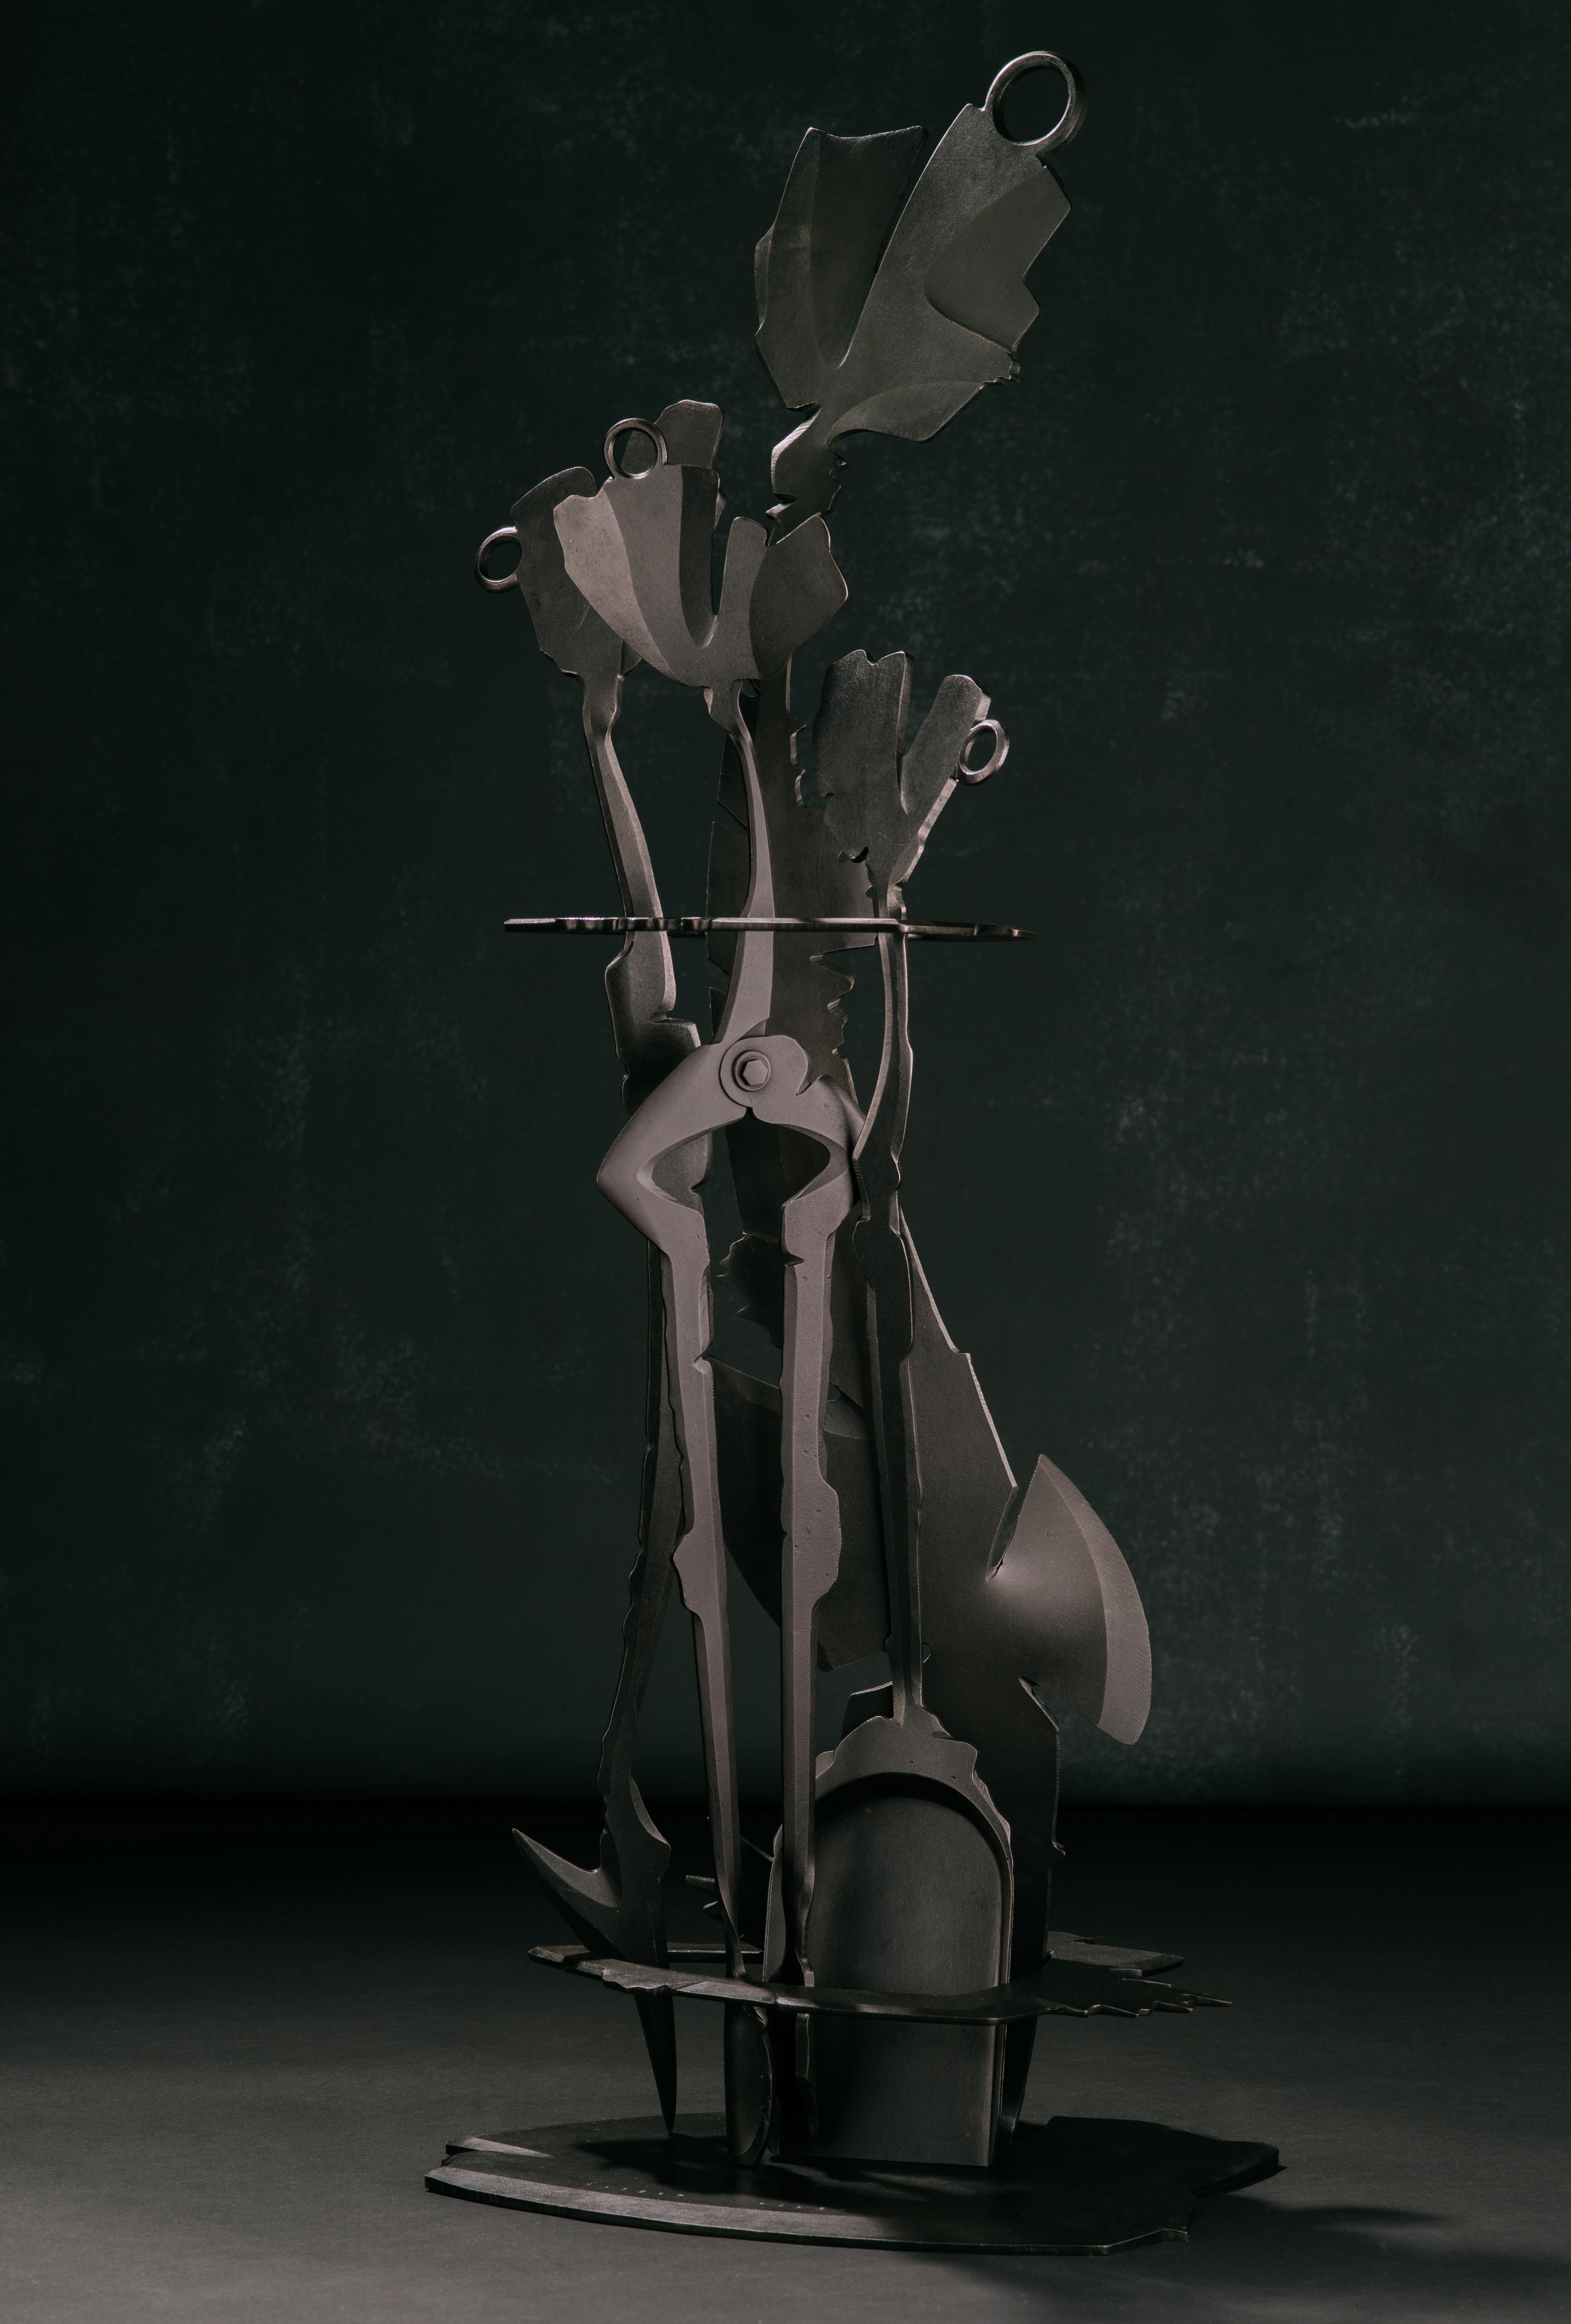 A set of fire tools by Albert Paley in formed and fabricated steel with a blackened finish, comprising a stand with three implements - - poker, shovel, and tongs. An exceptionally executed and decadent design with sharp outlines evocative of a rough